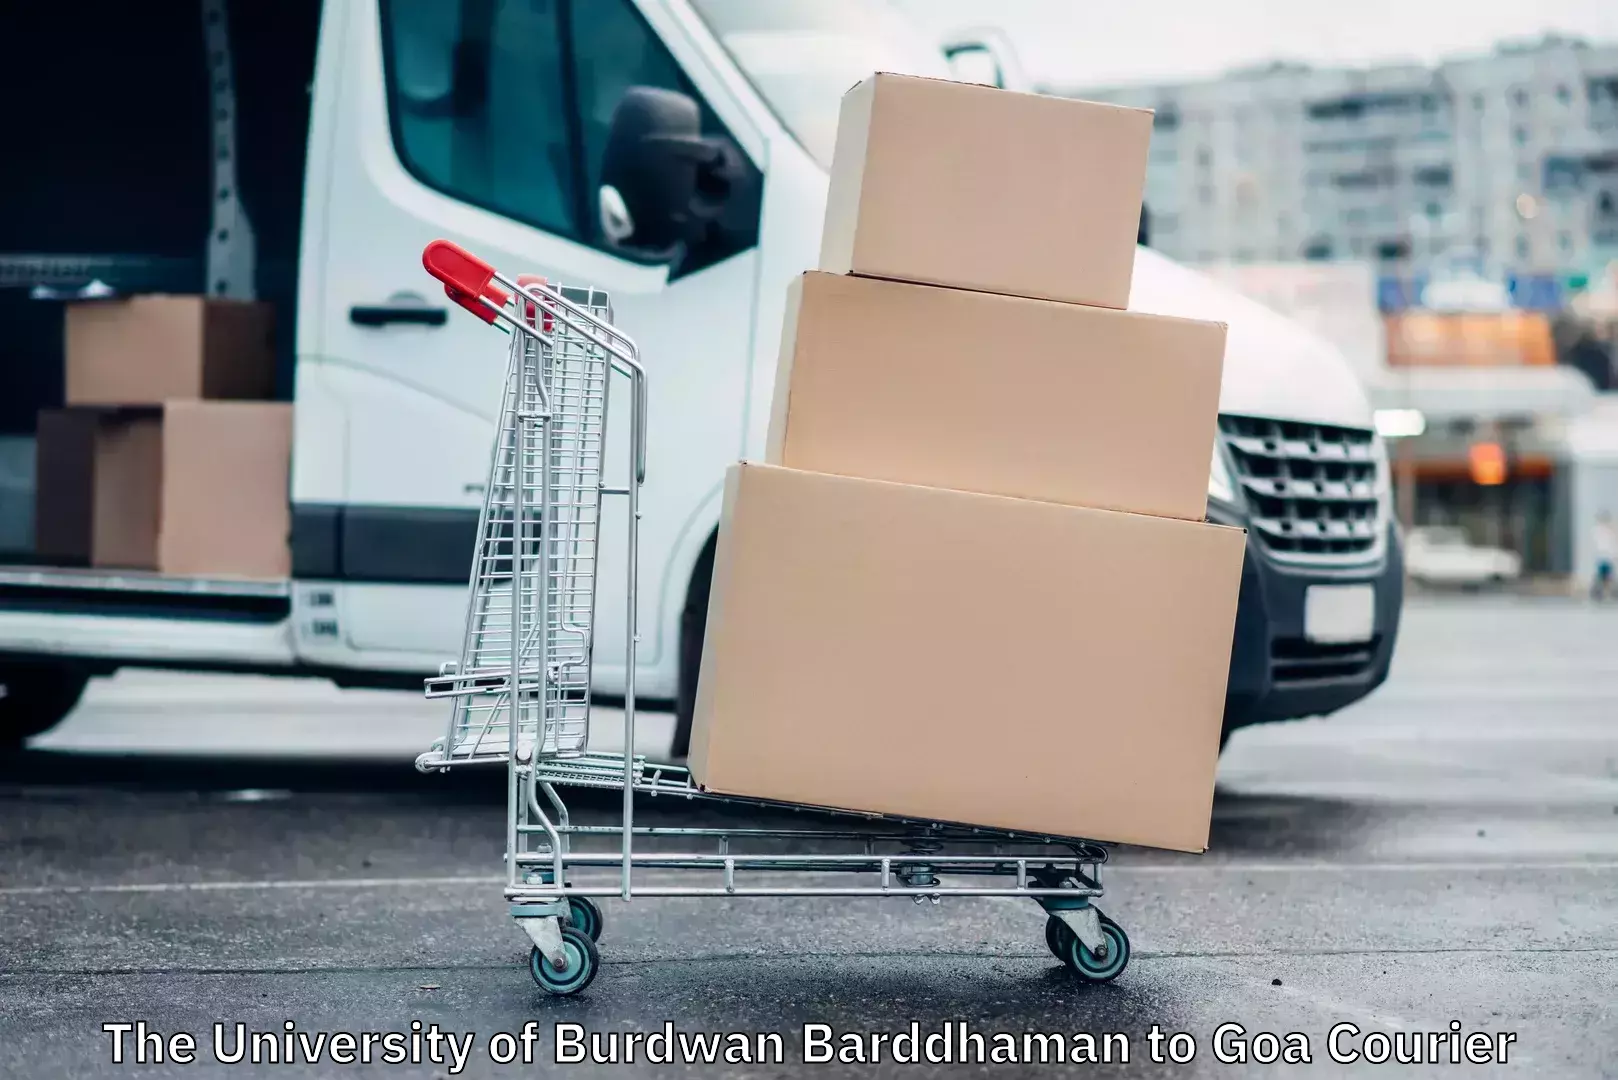 Customized delivery options The University of Burdwan Barddhaman to Goa